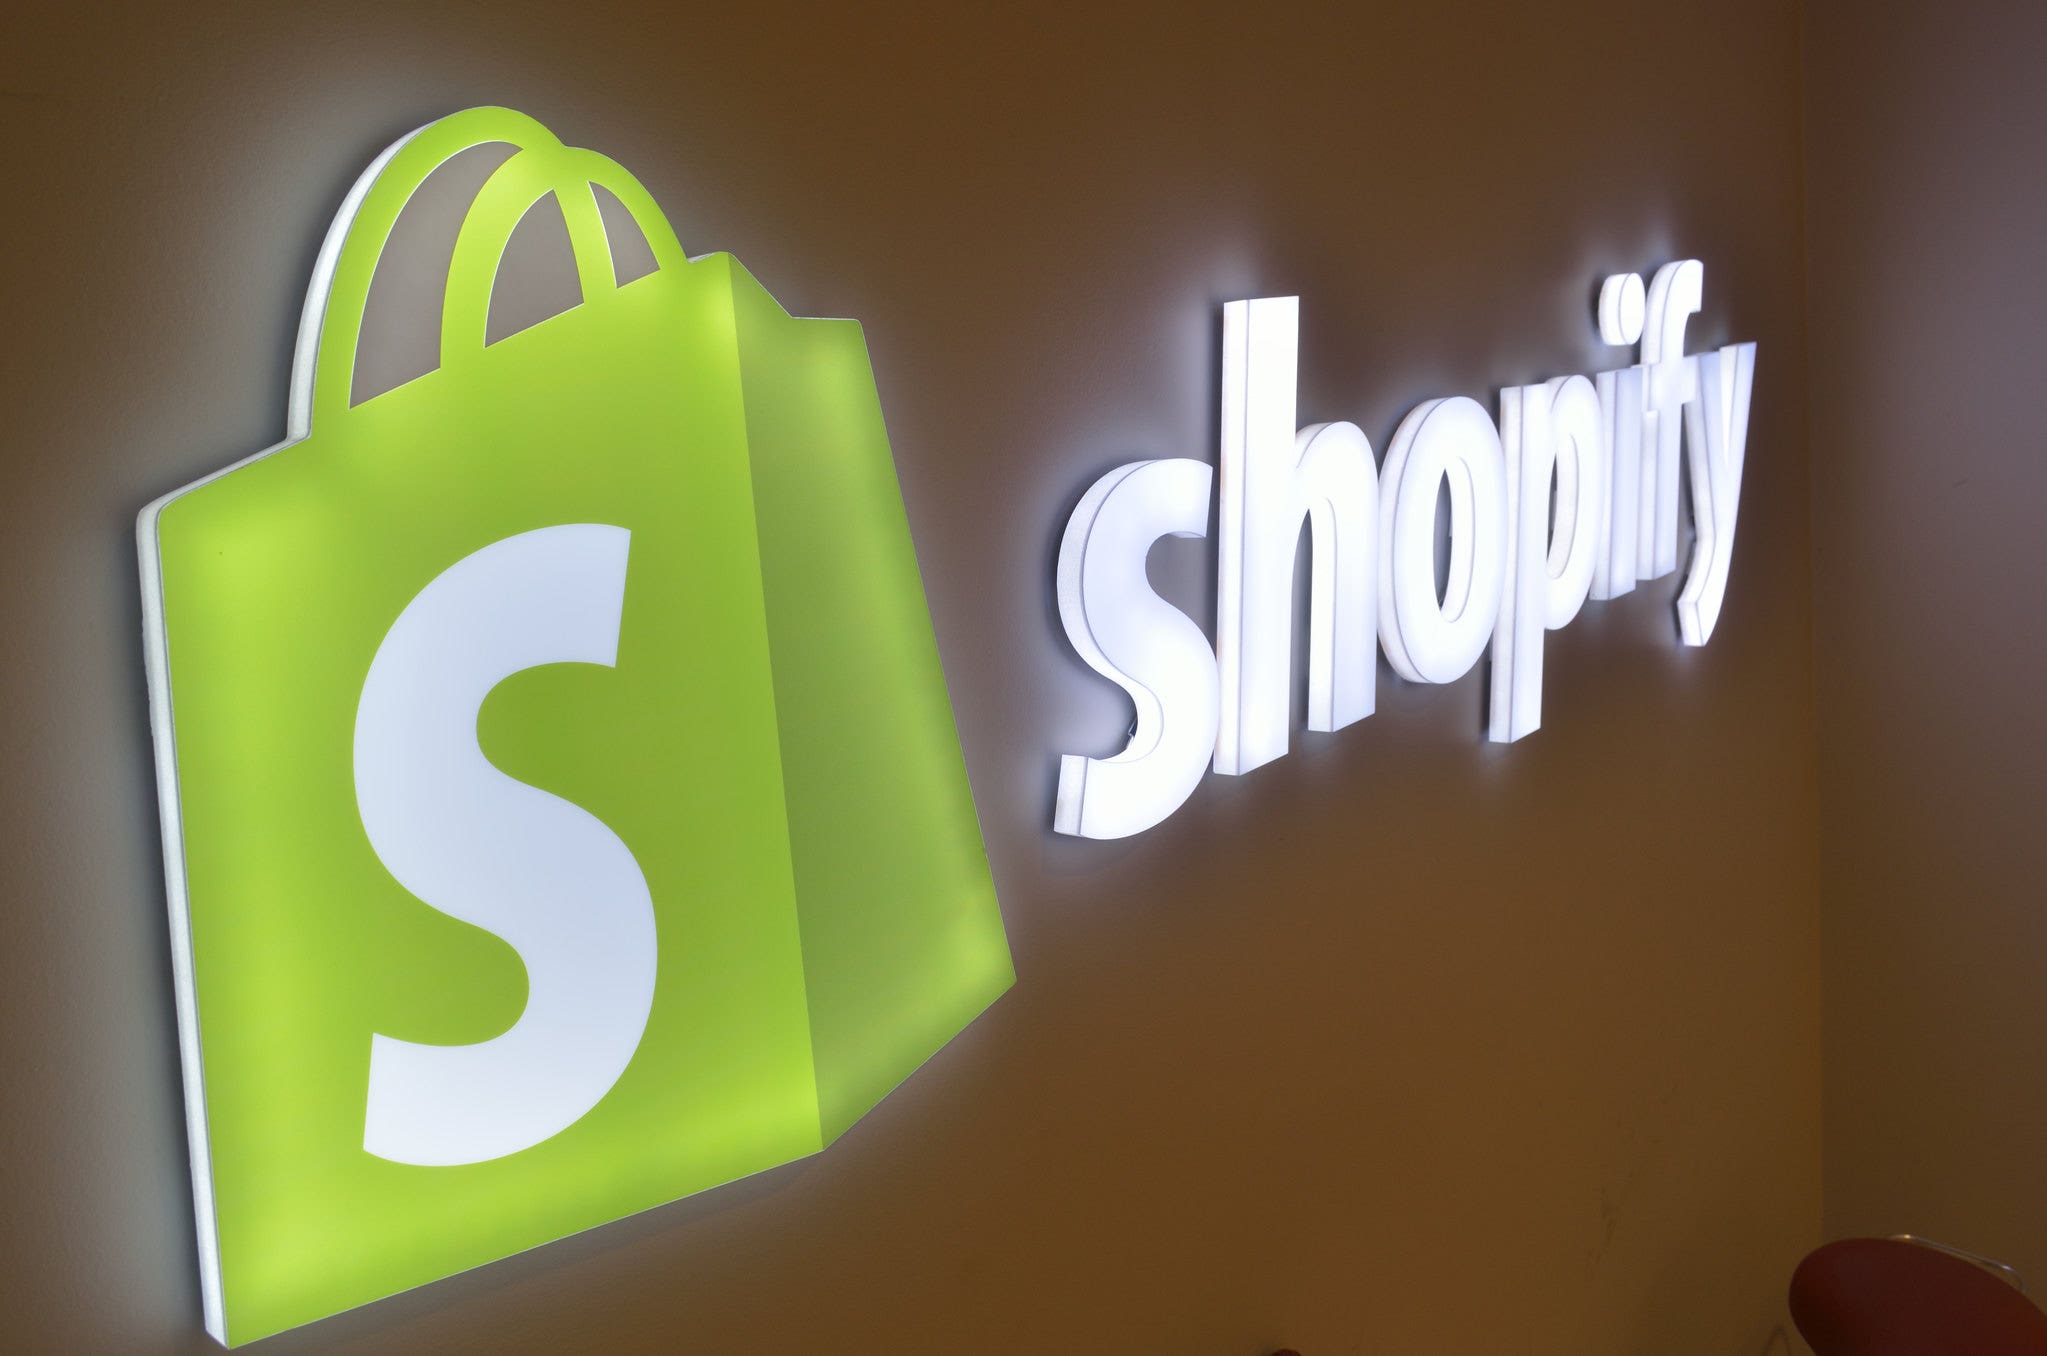 Shopify Stock Is Surging: What's Going On?